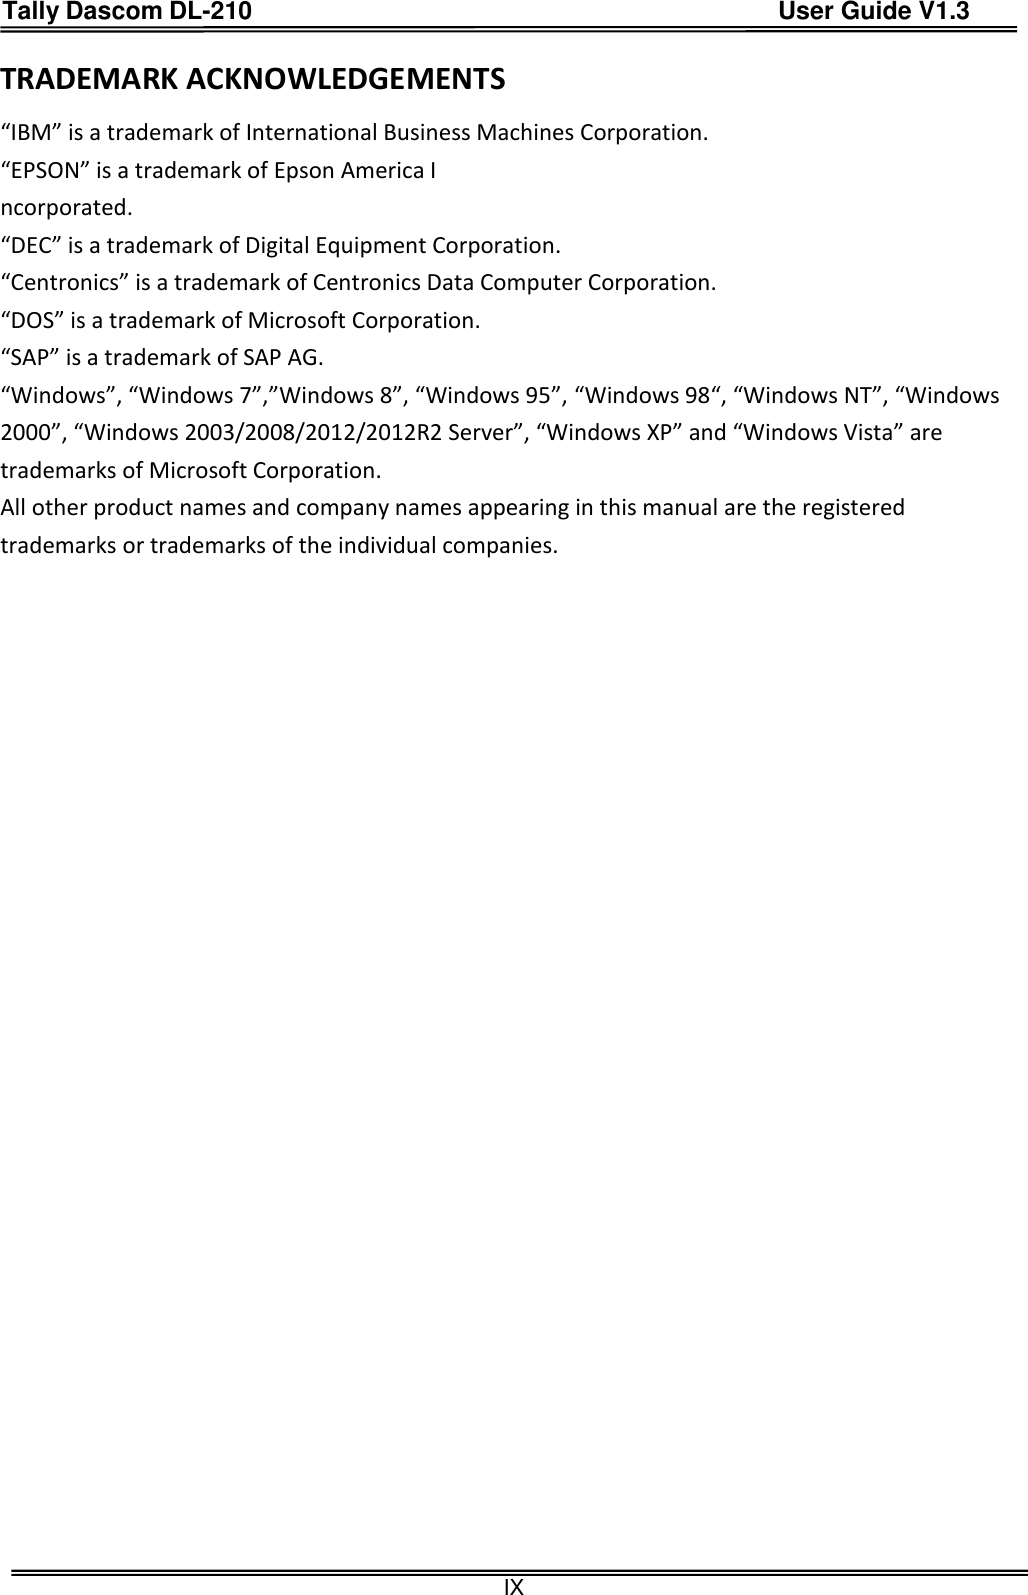 Tally Dascom DL-210                                          User Guide V1.3  IX TRADEMARK ACKNOWLEDGEMENTS “IBM” is a trademark of International Business Machines Corporation.   “EPSON” is a trademark of Epson America I ncorporated.   “DEC” is a trademark of Digital Equipment Corporation.   “Centronics” is a trademark of Centronics Data Computer Corporation.   “DOS” is a trademark of Microsoft Corporation.   “SAP” is a trademark of SAP AG.   “Windows”, “Windows 7”,”Windows 8”, “Windows 95”, “Windows 98“, “Windows NT”, “Windows 2000”, “Windows 2003/2008/2012/2012R2 Server”, “Windows XP” and “Windows Vista” are trademarks of Microsoft Corporation.   All other product names and company names appearing in this manual are the registered trademarks or trademarks of the individual companies.   